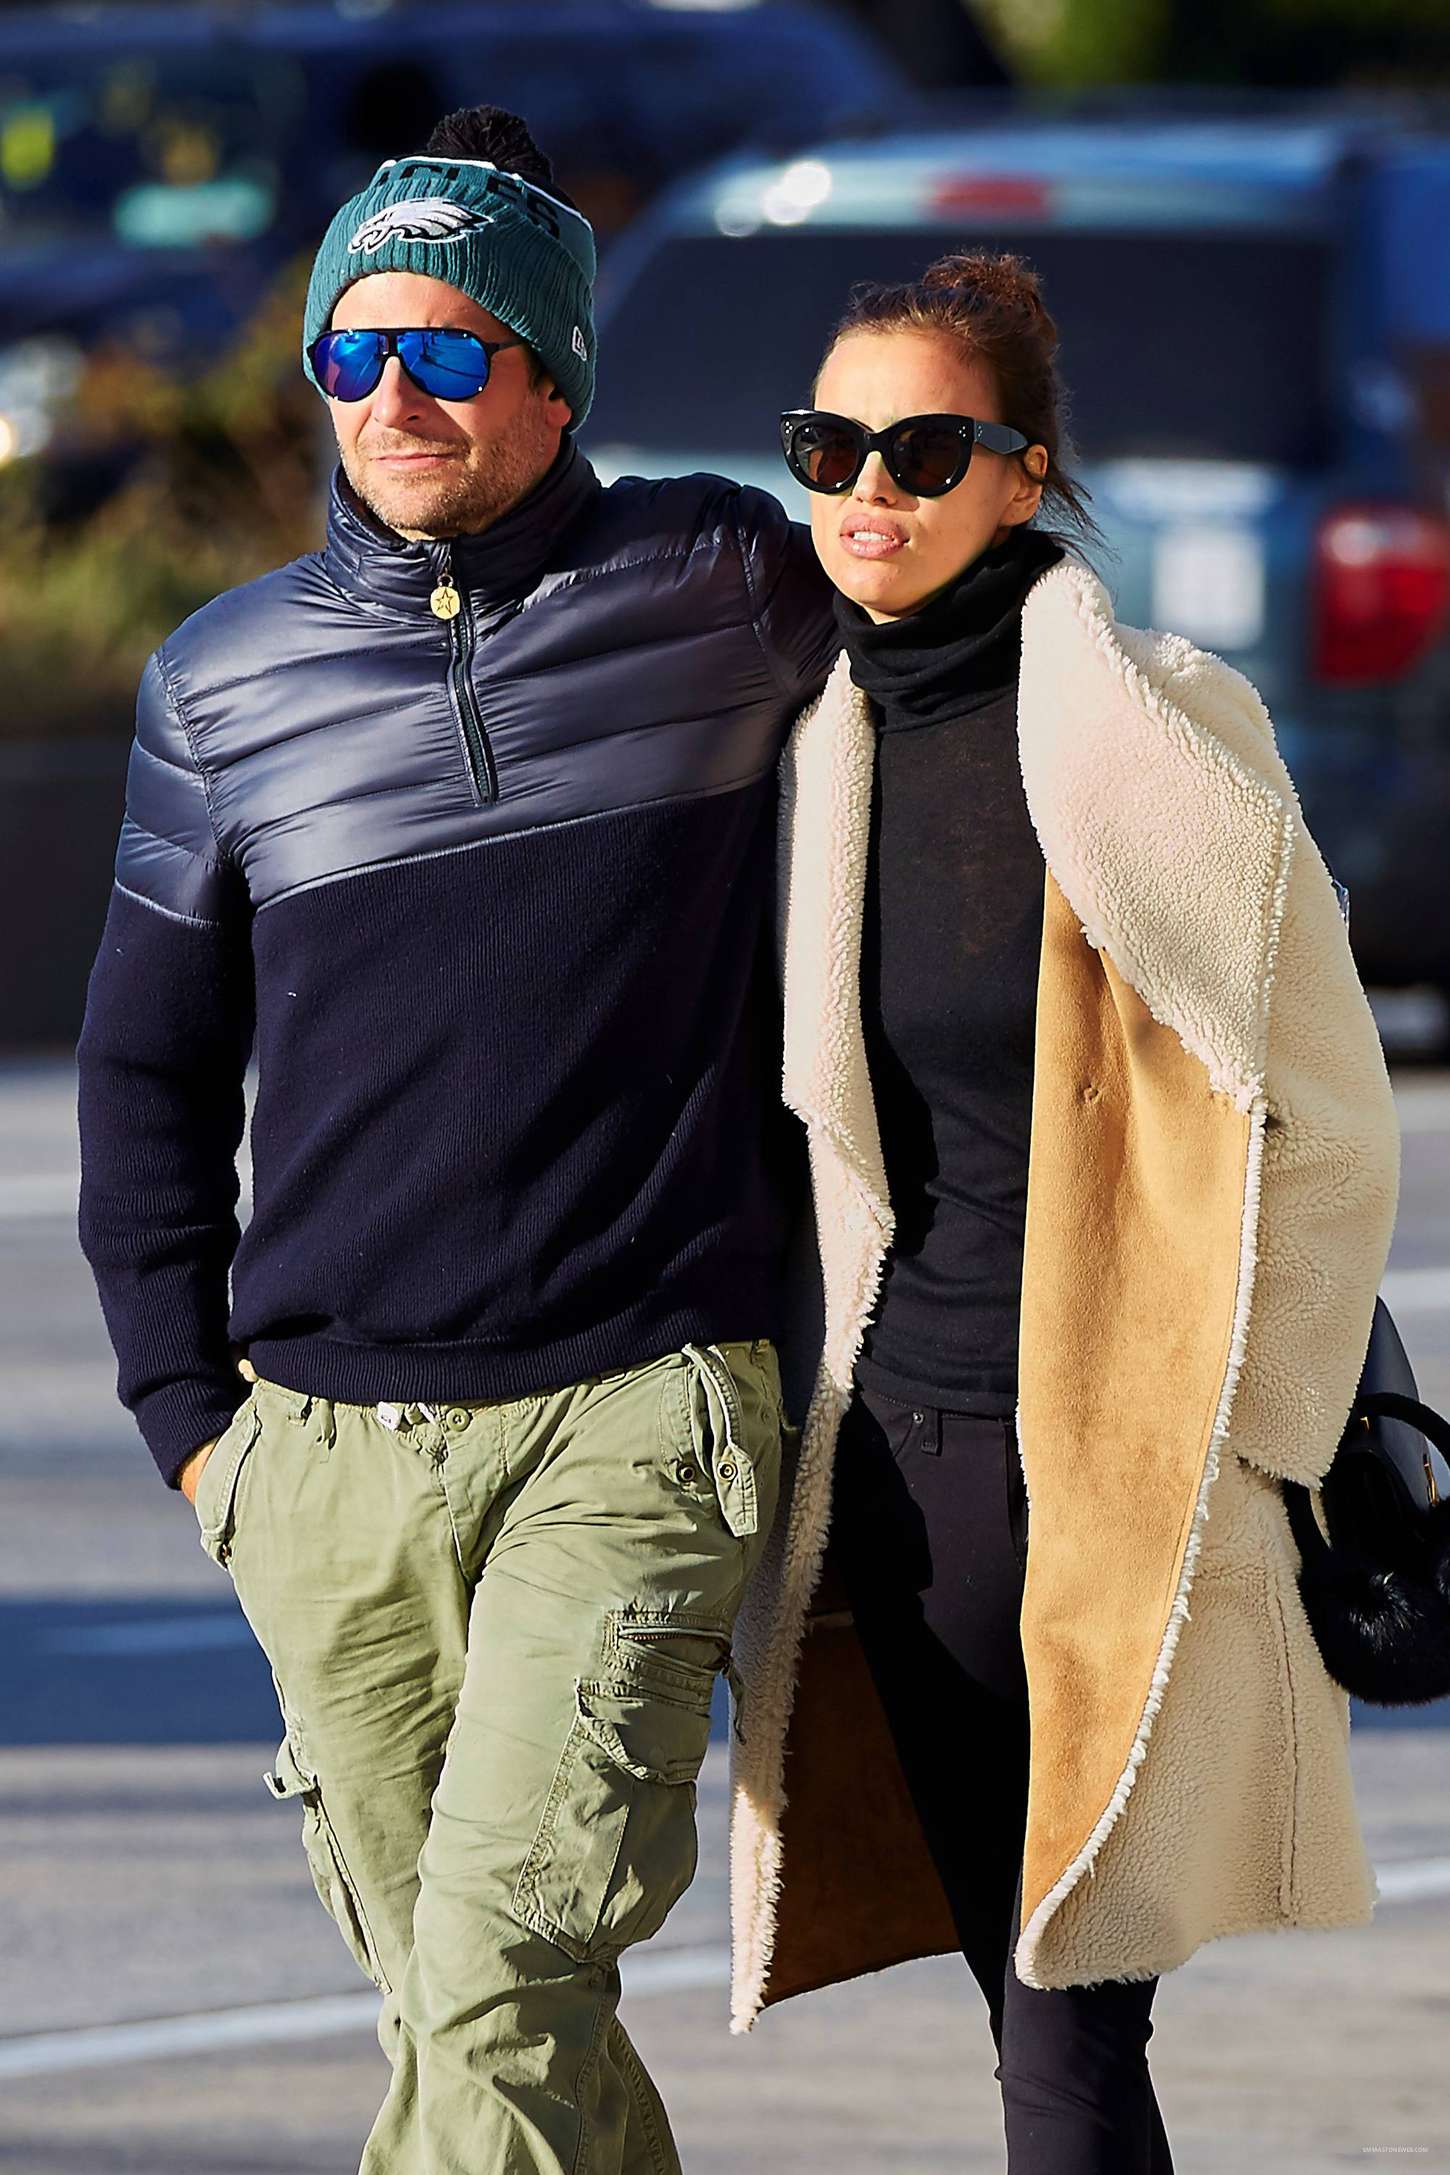 Irina Shayk and Bradley Cooper out in NYC